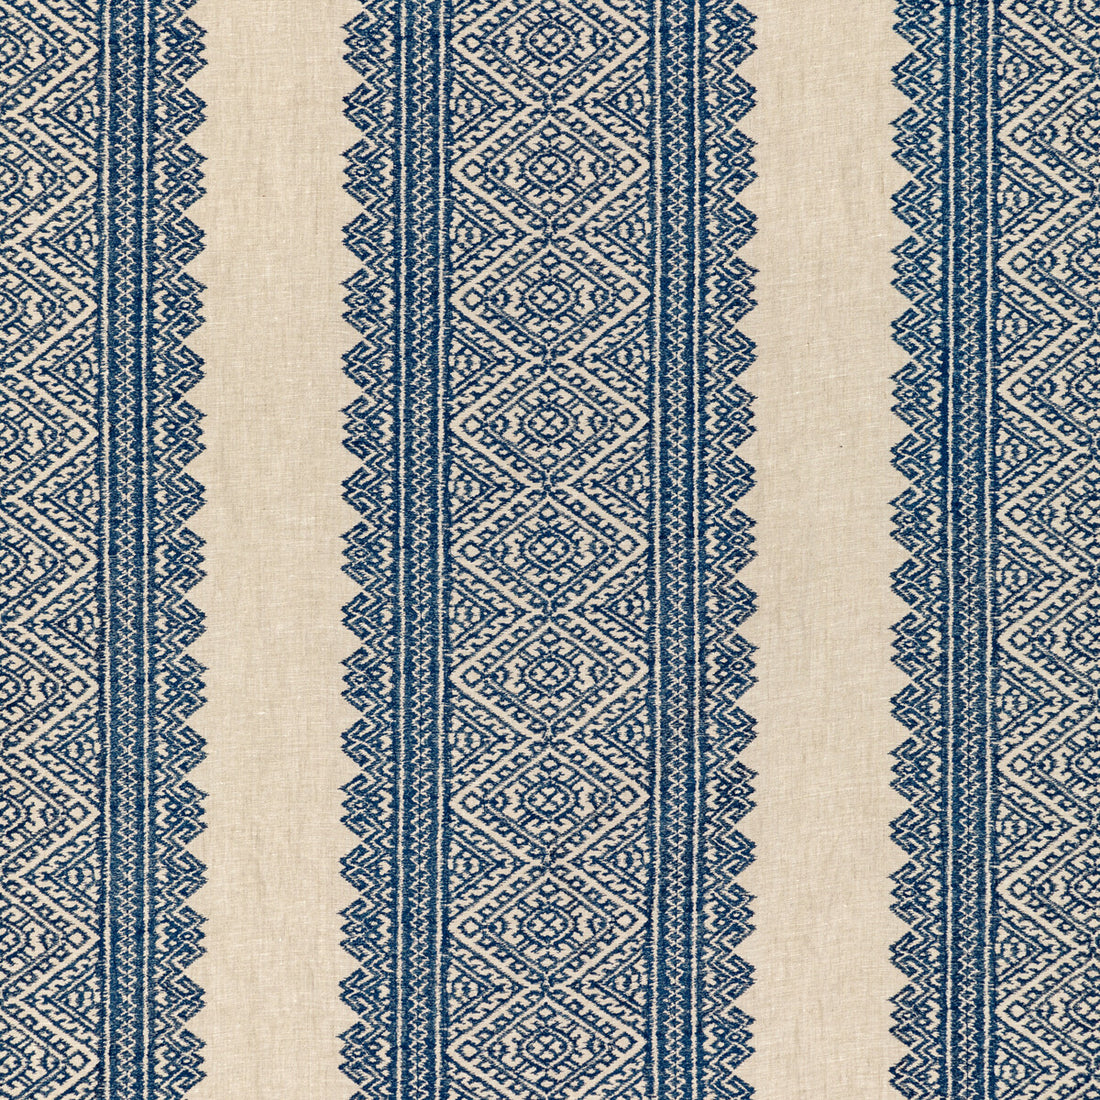 Avon Embroidery fabric in denim color - pattern 2020211.505.0 - by Lee Jofa in the Breckenridge collection